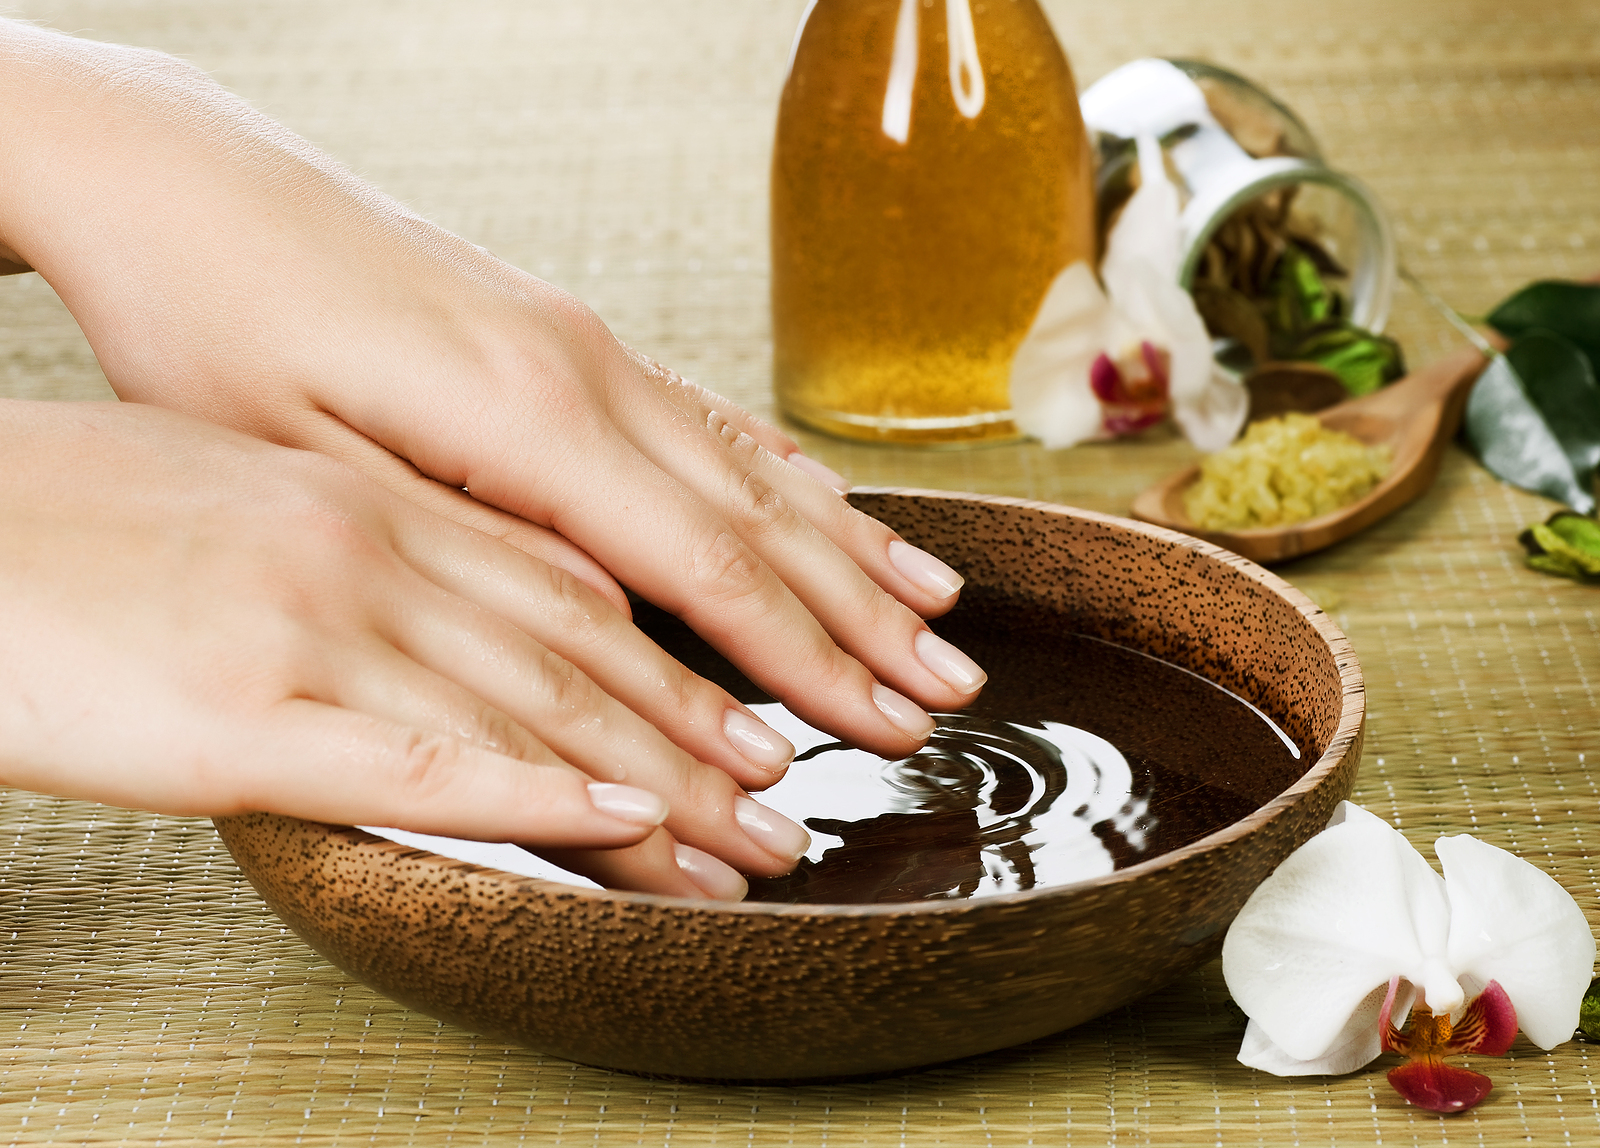 ... : Home » Nail Salon Atlanta Helps You In Taking Care Of Your Nails